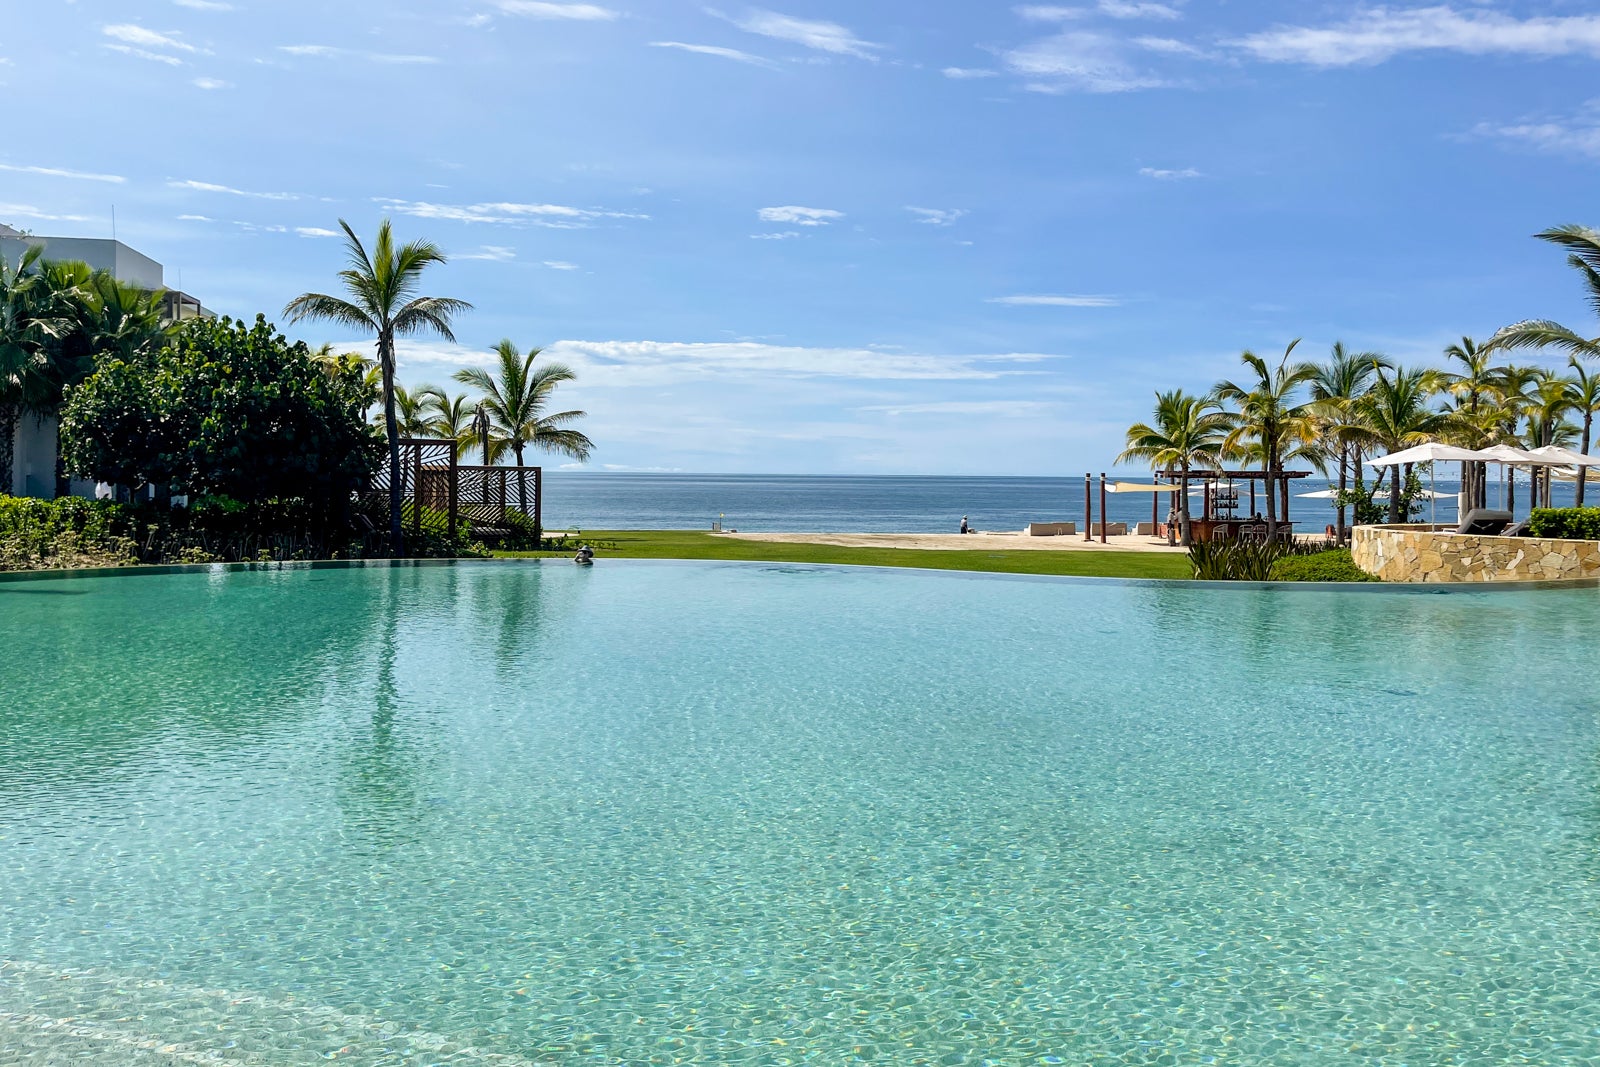 Fit for a king: A review of the Conrad Punta de Mita